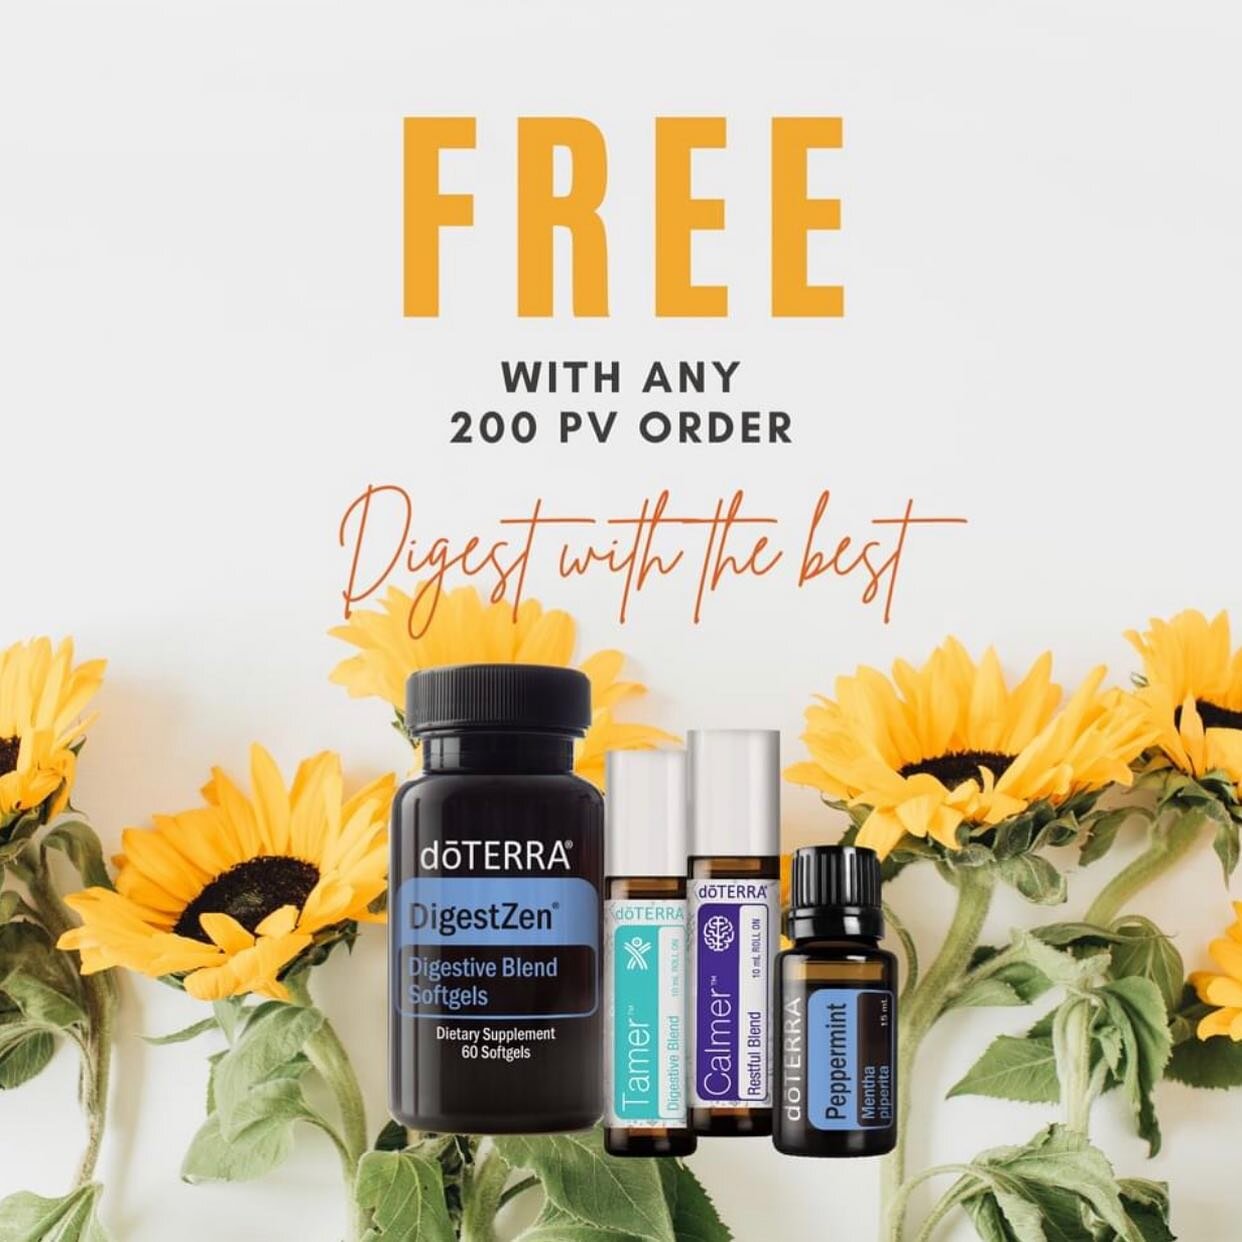 October promotions:
Digest with the Best: Place a single 200 PV order through October 31st and get DigestZen Softgels, Peppermint 15 mL, Calmer Touch 10 mL, and Tamer Touch 10 mL for FREE! #digestivehealth #digestzen #dōterra #tamer #belly #goodhealt